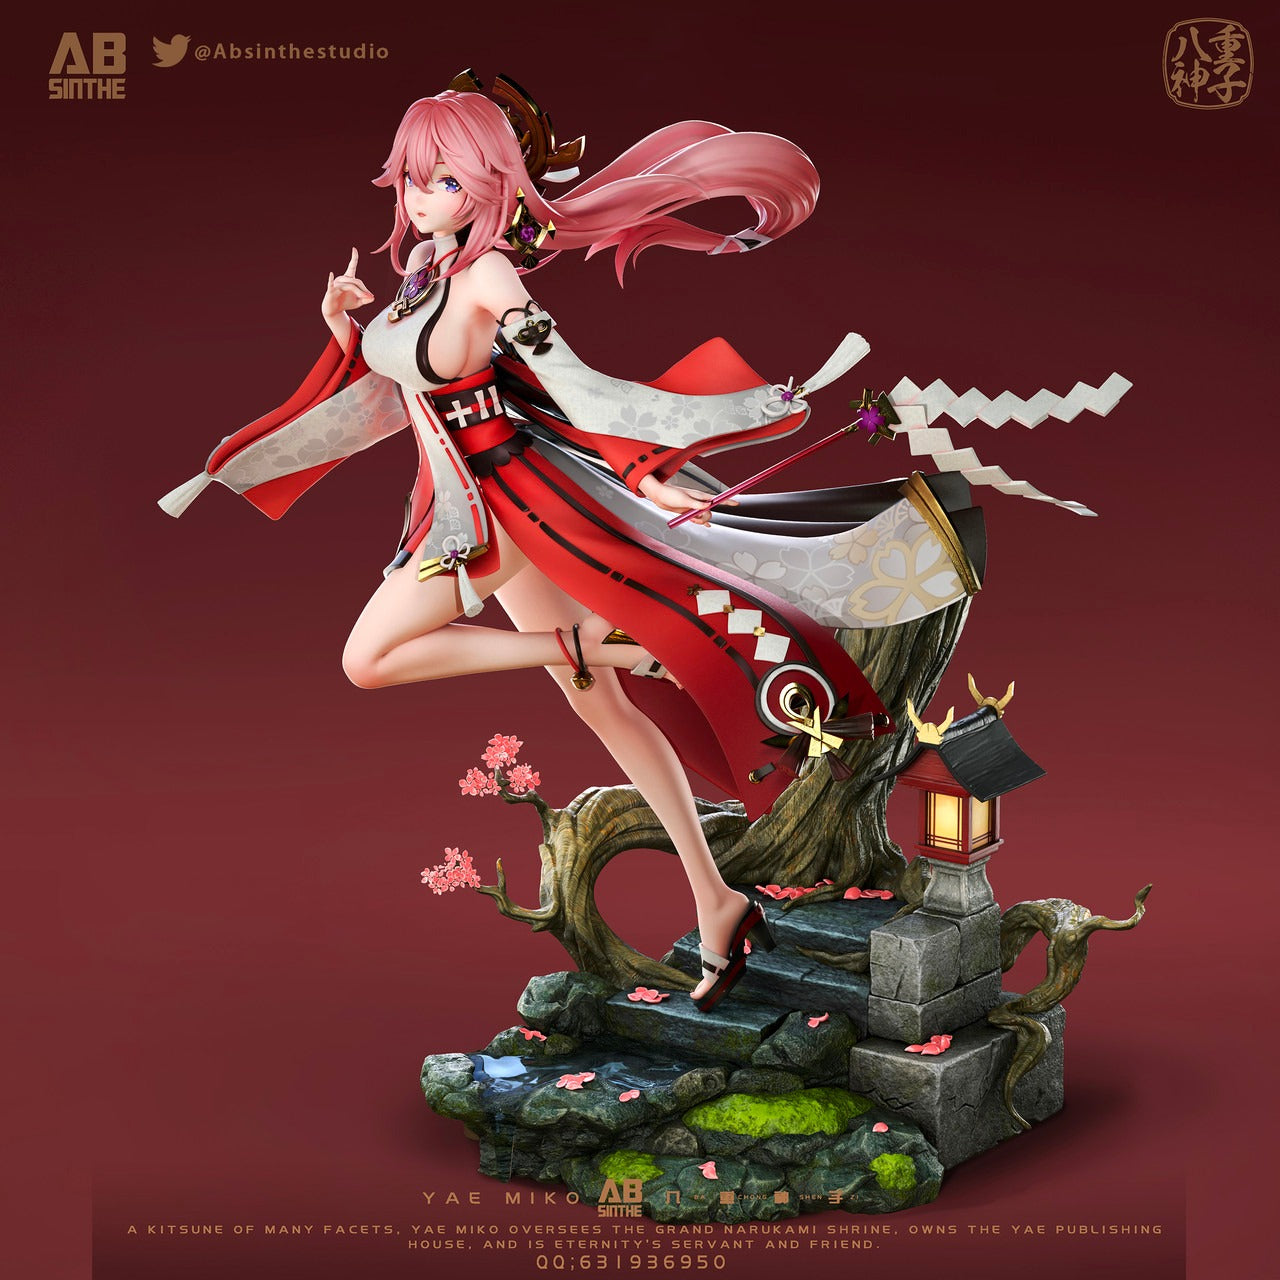 [PRE ORDER] Genshin Impact - Absinthe Studio - Yae Miko(Price does not include shipping)